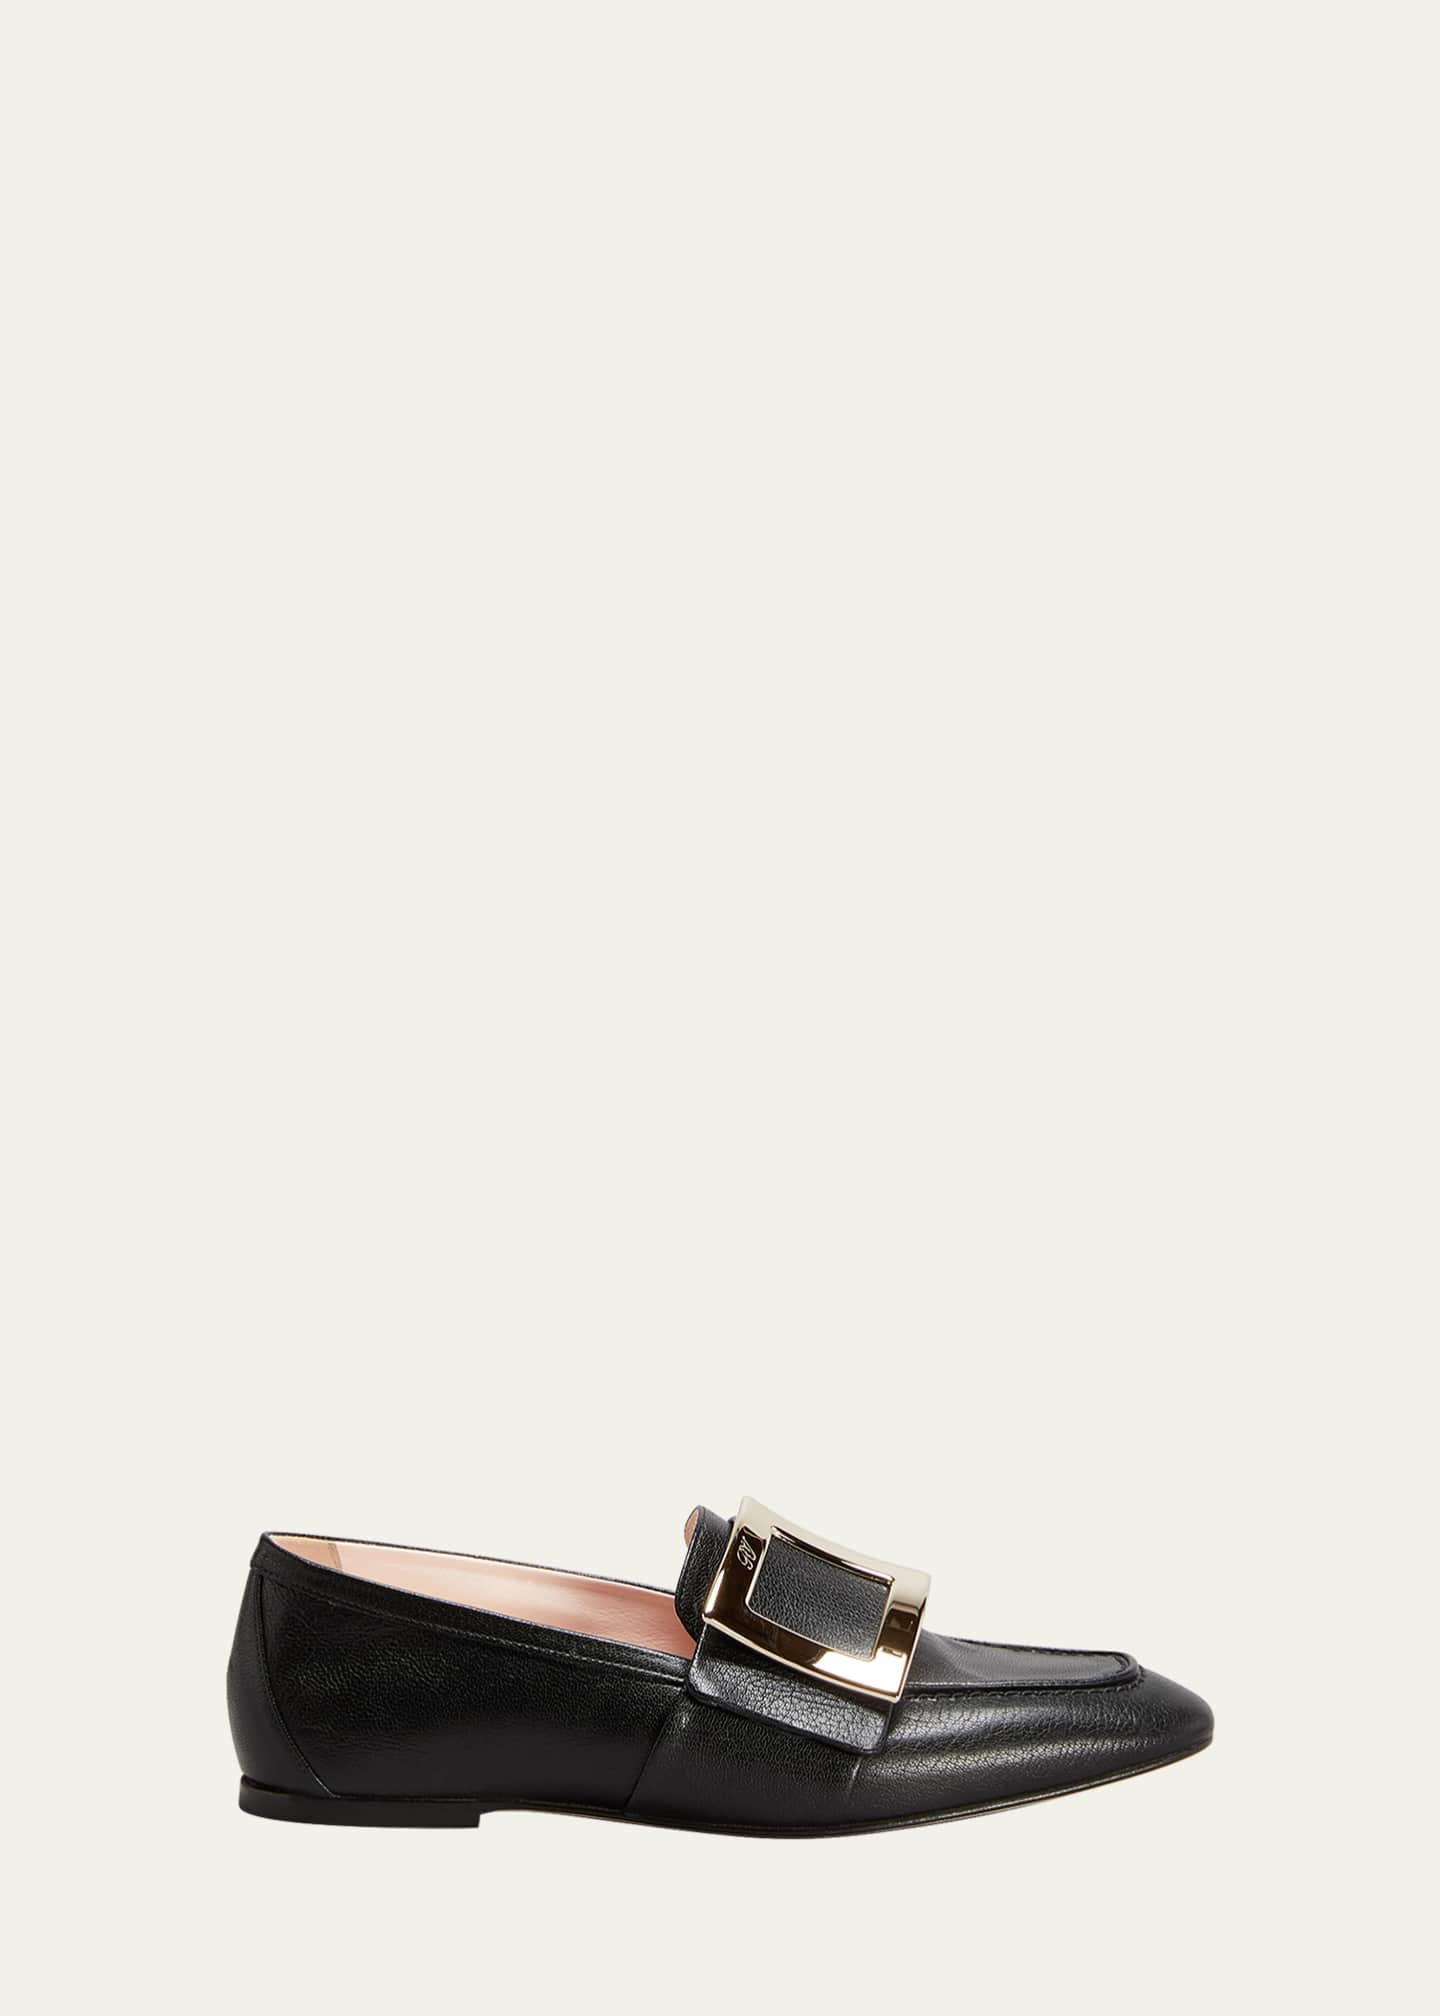 Roger Vivier 10mm Leather Buckle Flat Loafers - Bergdorf Goodman